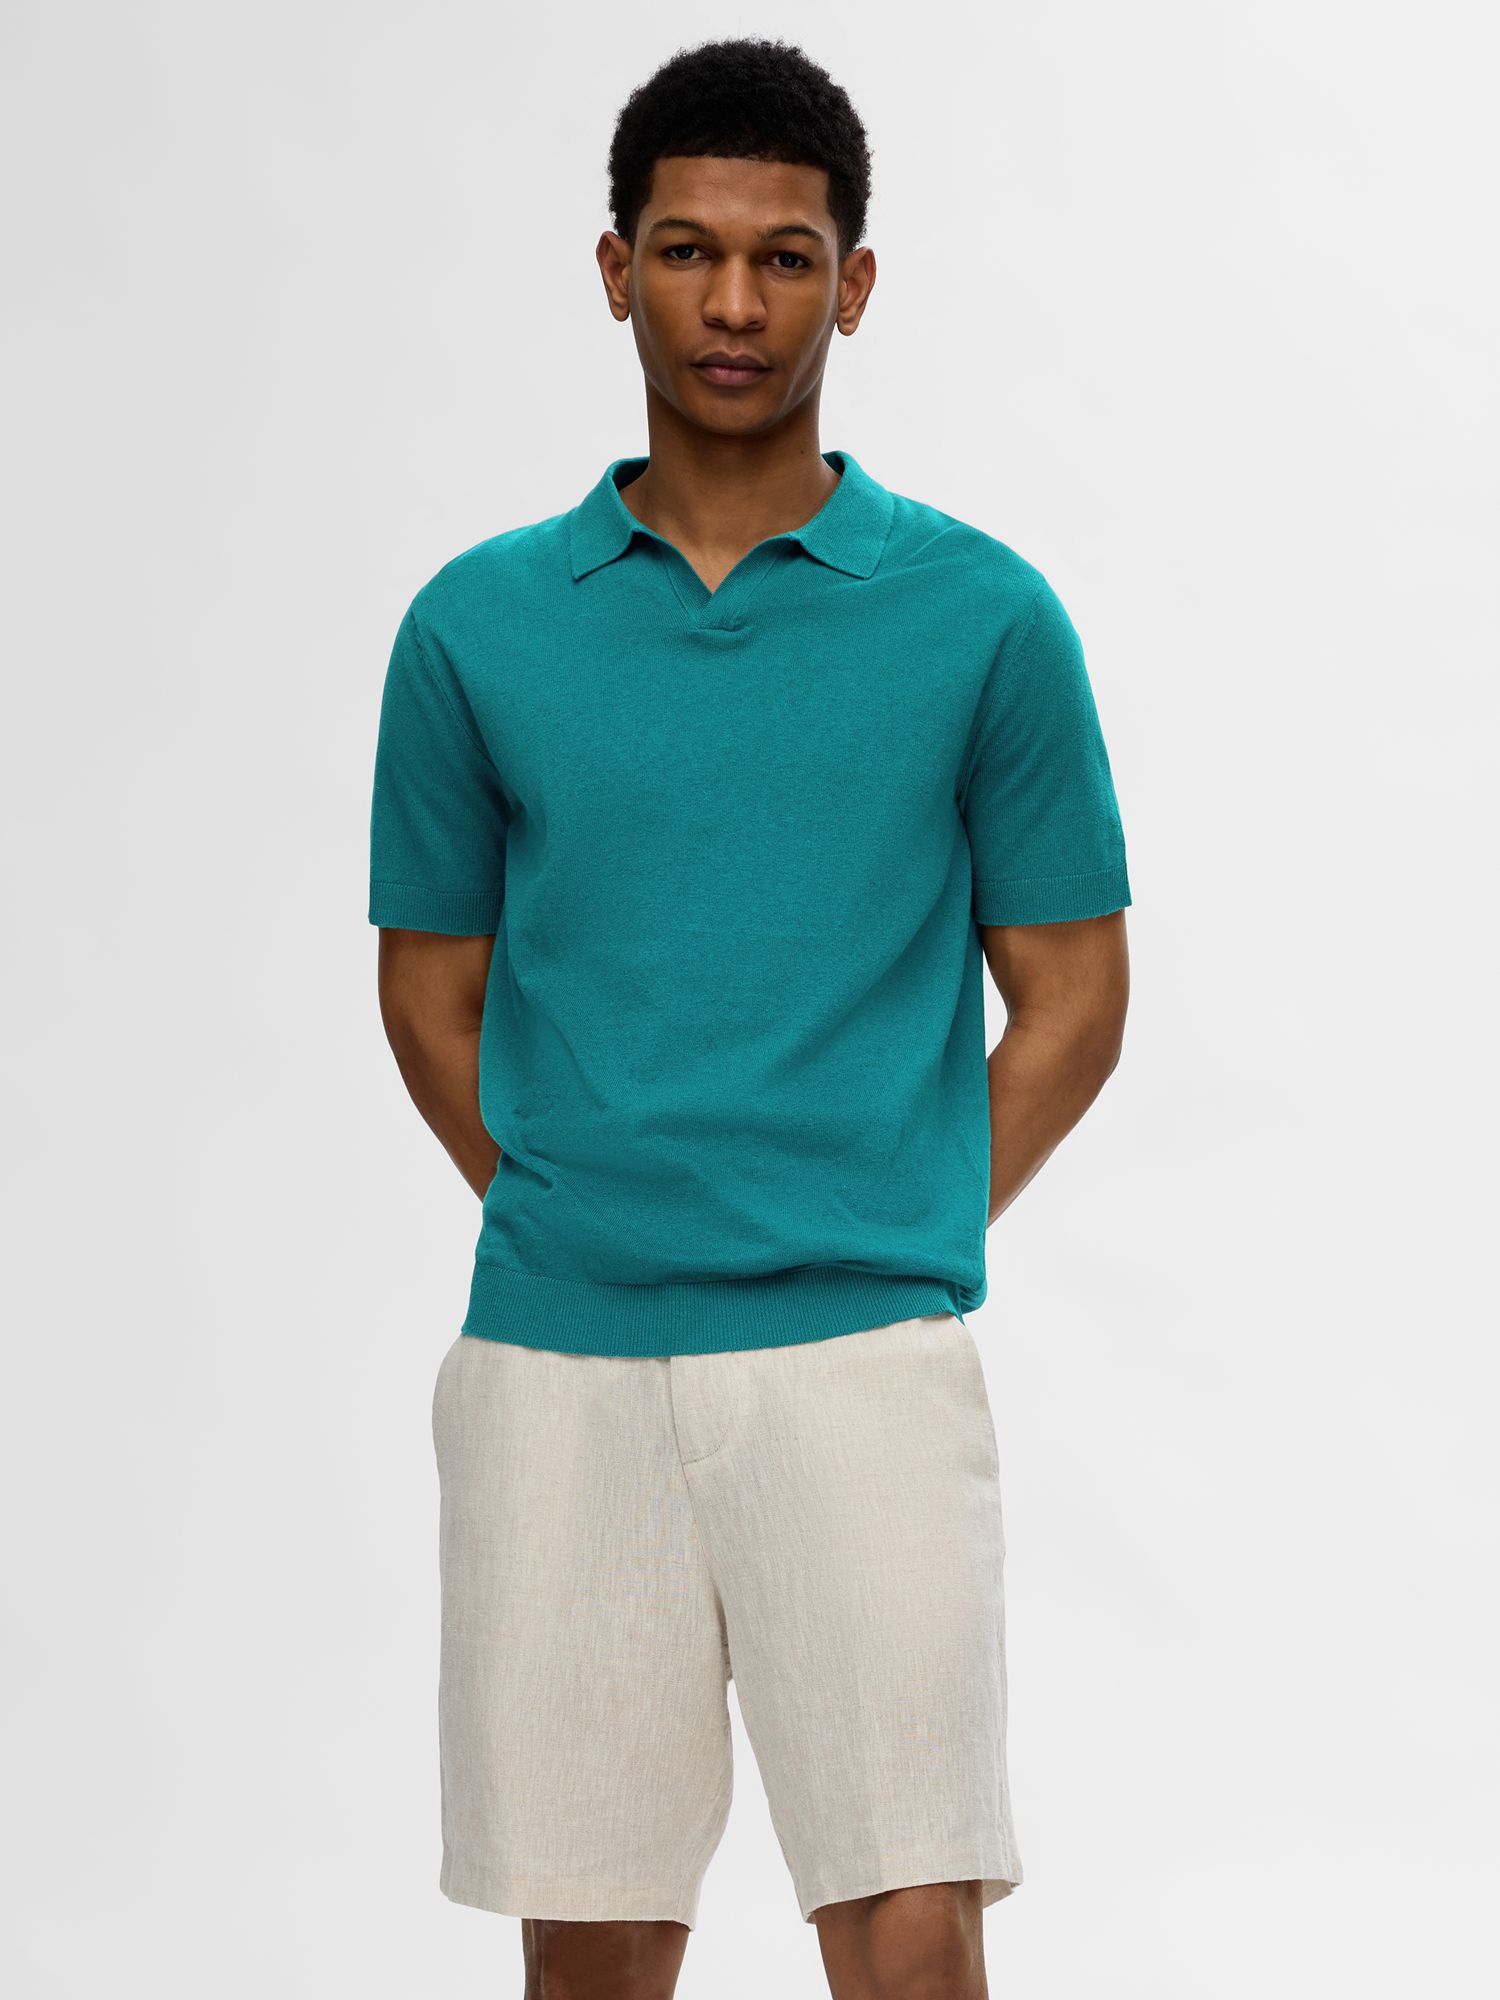 Buy SELECTED HOMME Short Sleeve Linen Polo Shirt, Blue Online at johnlewis.com